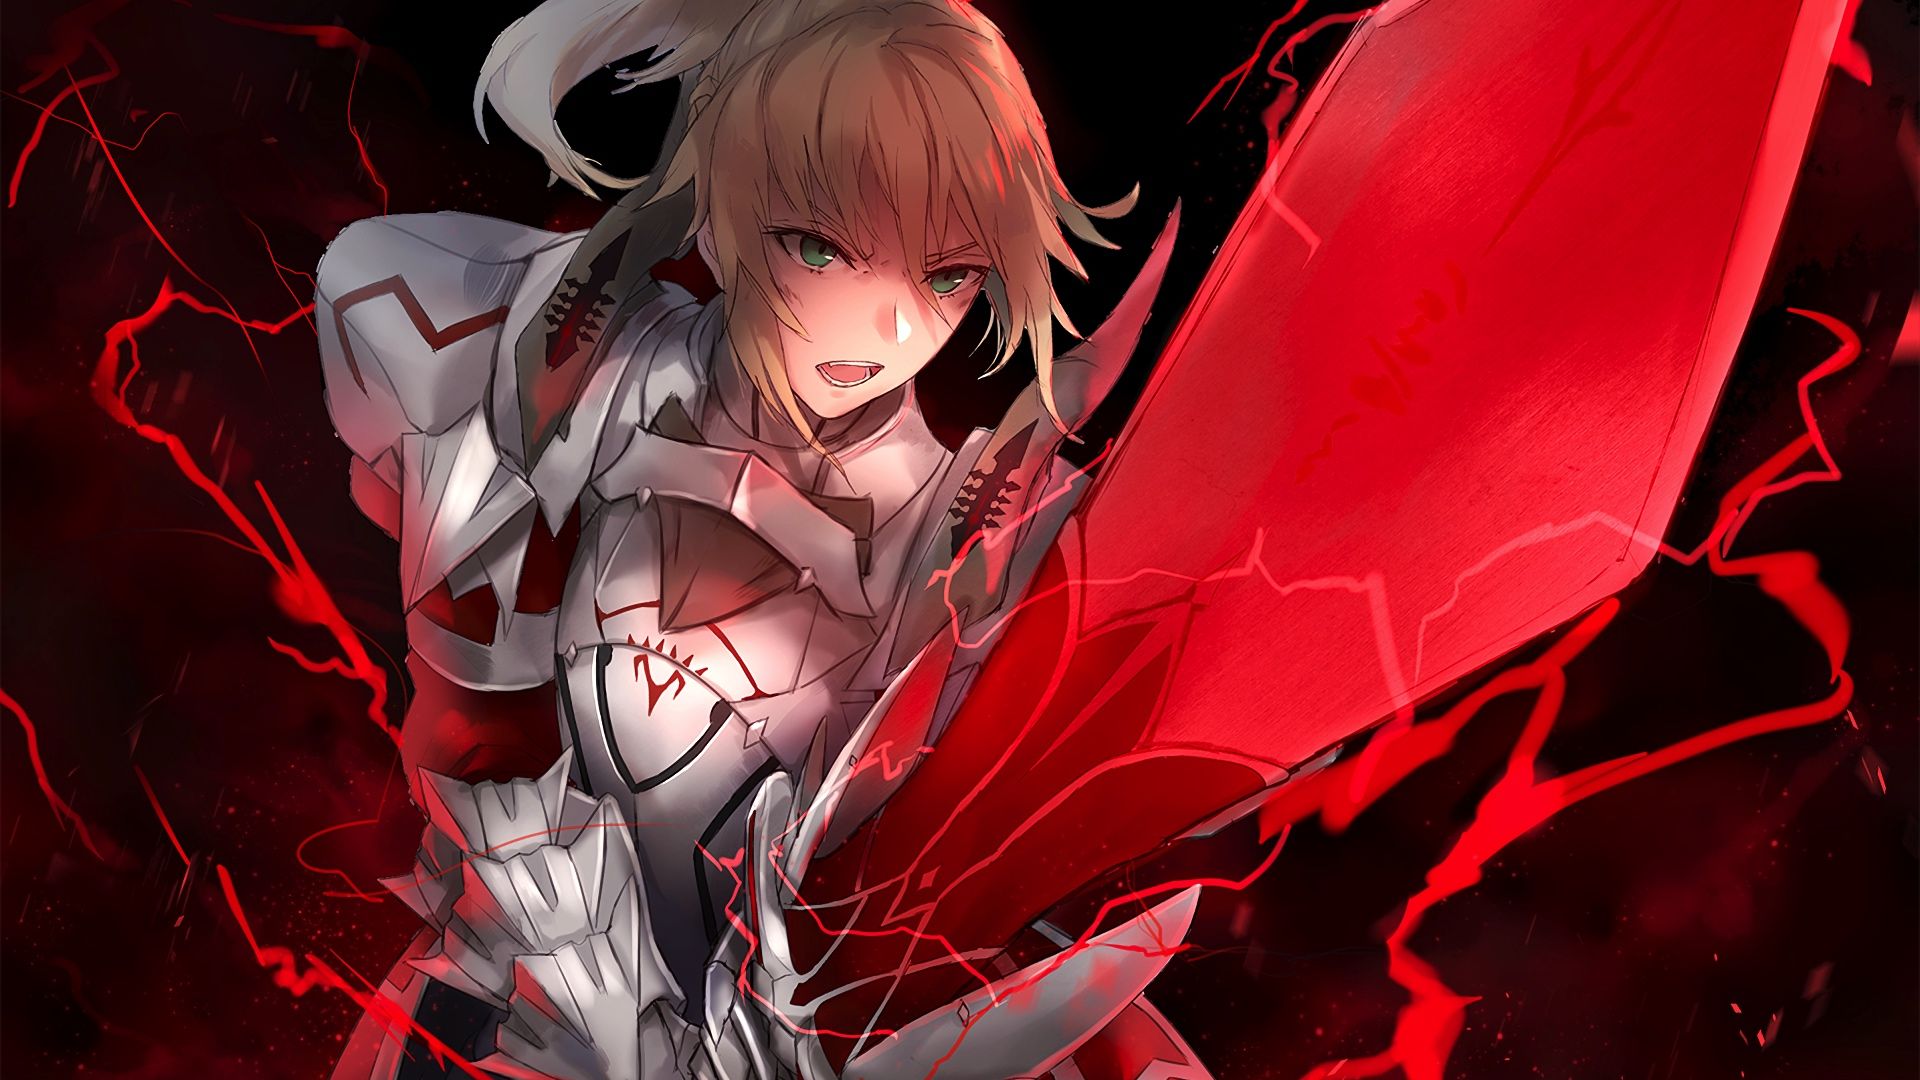 Desktop Wallpaper Angry, Saber, Red, Fate/Stay Night, Fate Series